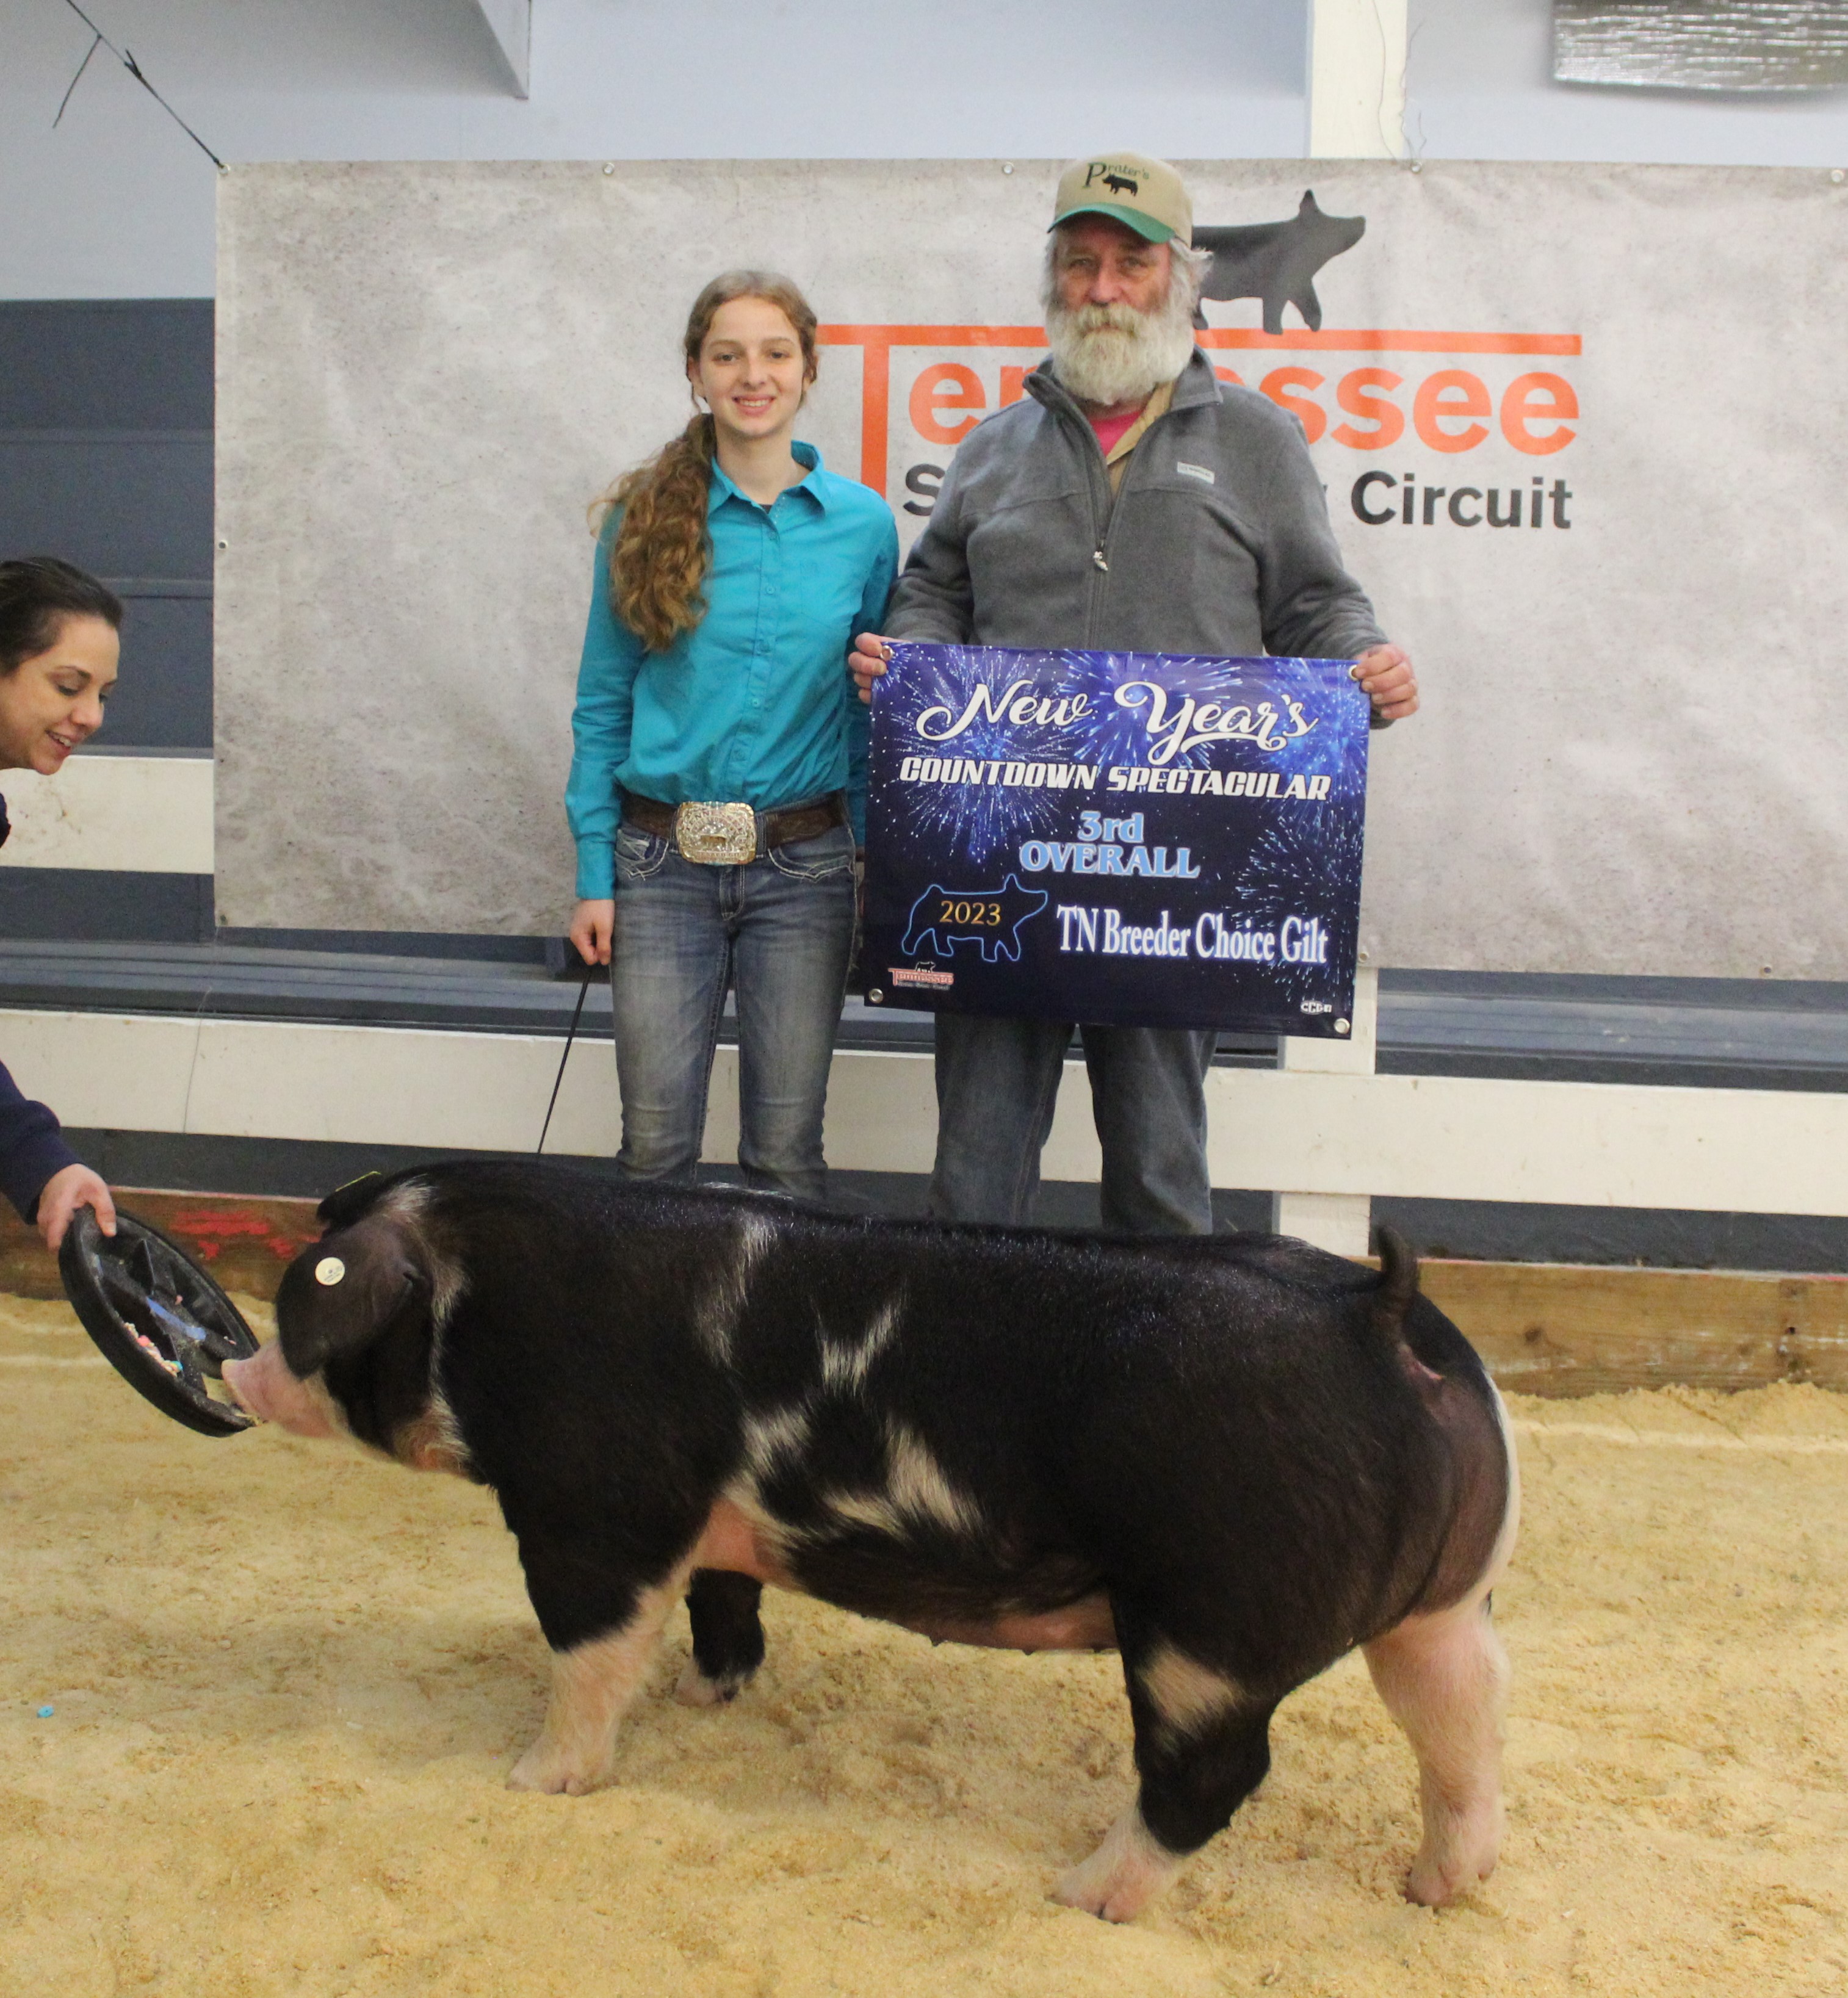 Jacey Bowers
2022 New Year's Spectacular
Day 1 - Reserve Champion Spot Gilt - Champion TN Bred Spot Gilt 
4th Overall Purebred Gilt
Day 2 - 3rd Breeders Choice Gilt